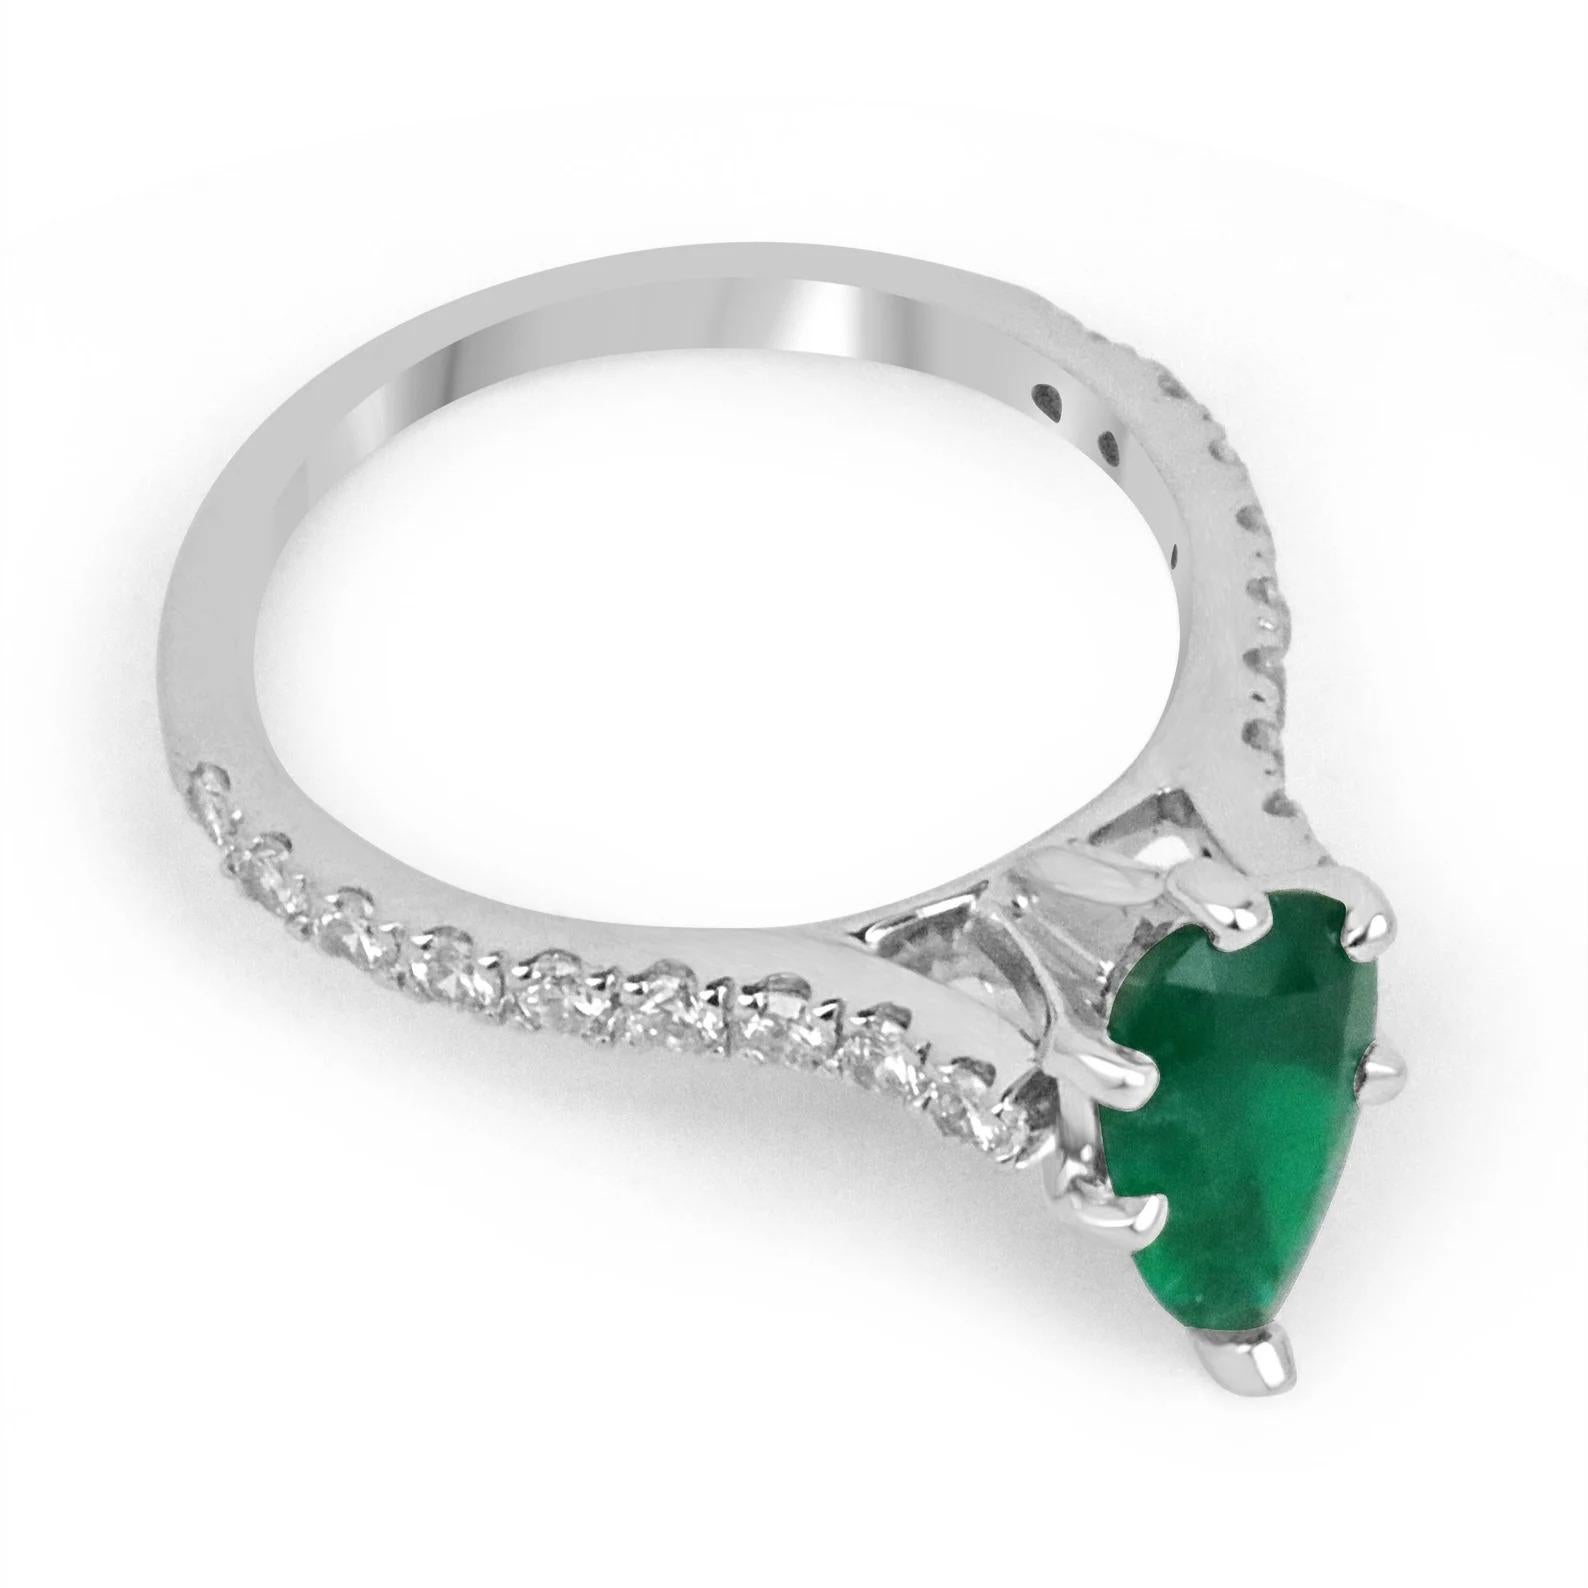 A beautiful dainty rare emerald and diamond ring. This gorgeous piece features a 0.72-carat, natural high quality dark green genuine emerald with phenomenal characteristics. Set within five prongs, and having brilliant round cut brilliant VS